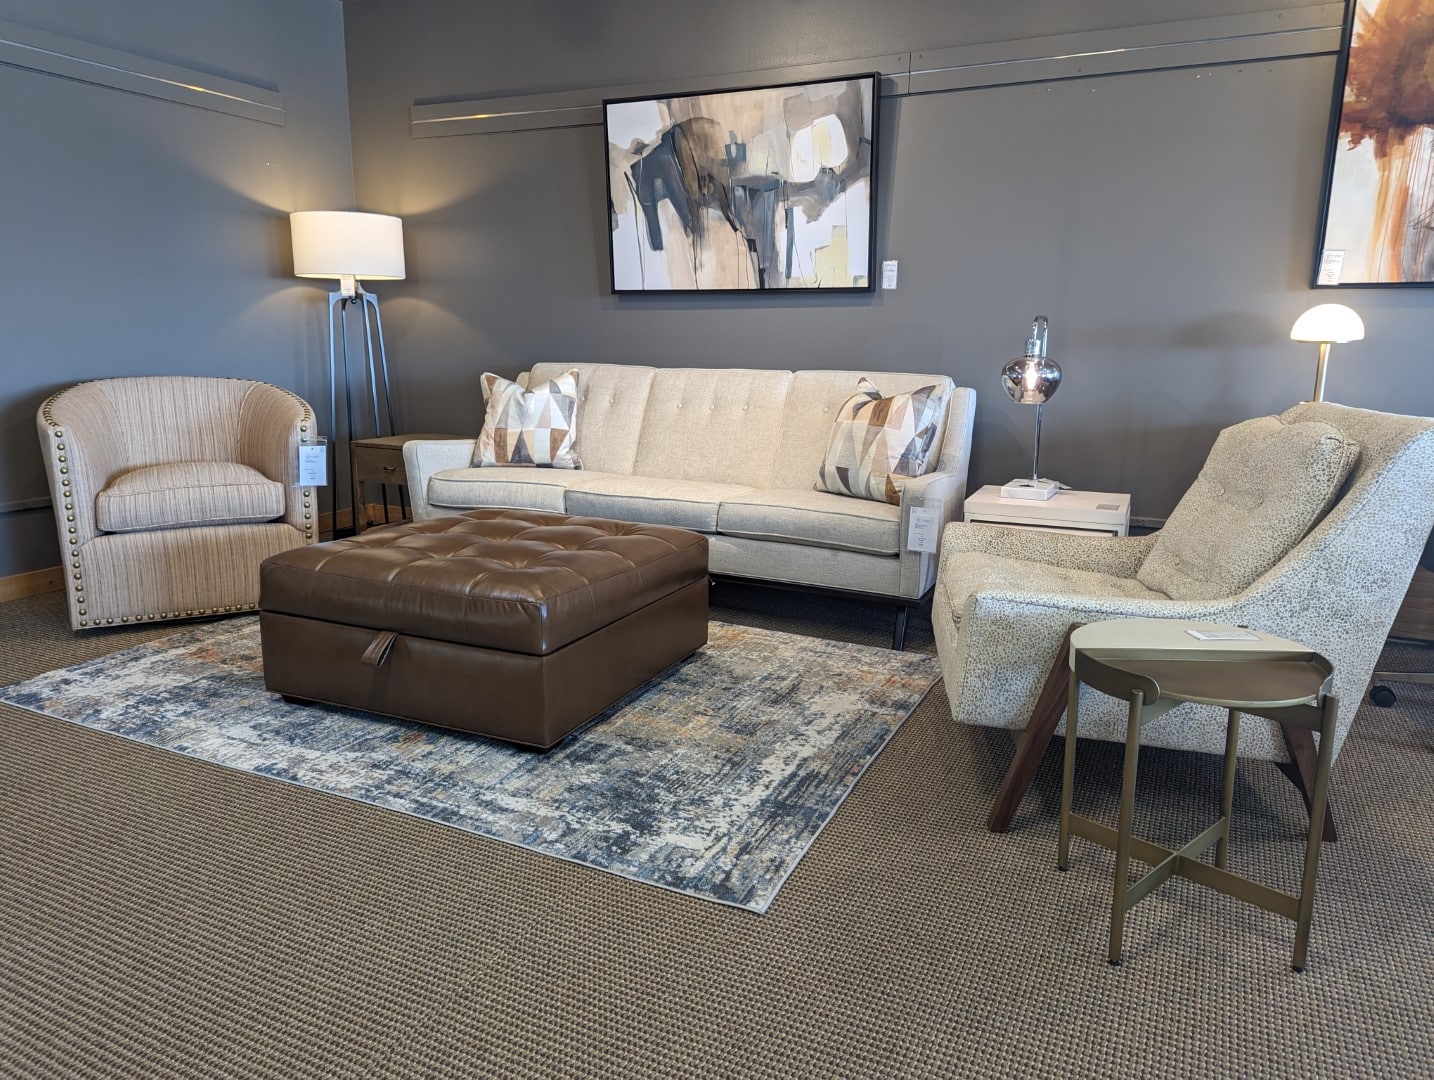 Ana Sofa with Sally Swivel Chair Grace Chair and Baxter Storage Ottoman - At By Design Custom Furniture + Interior Design